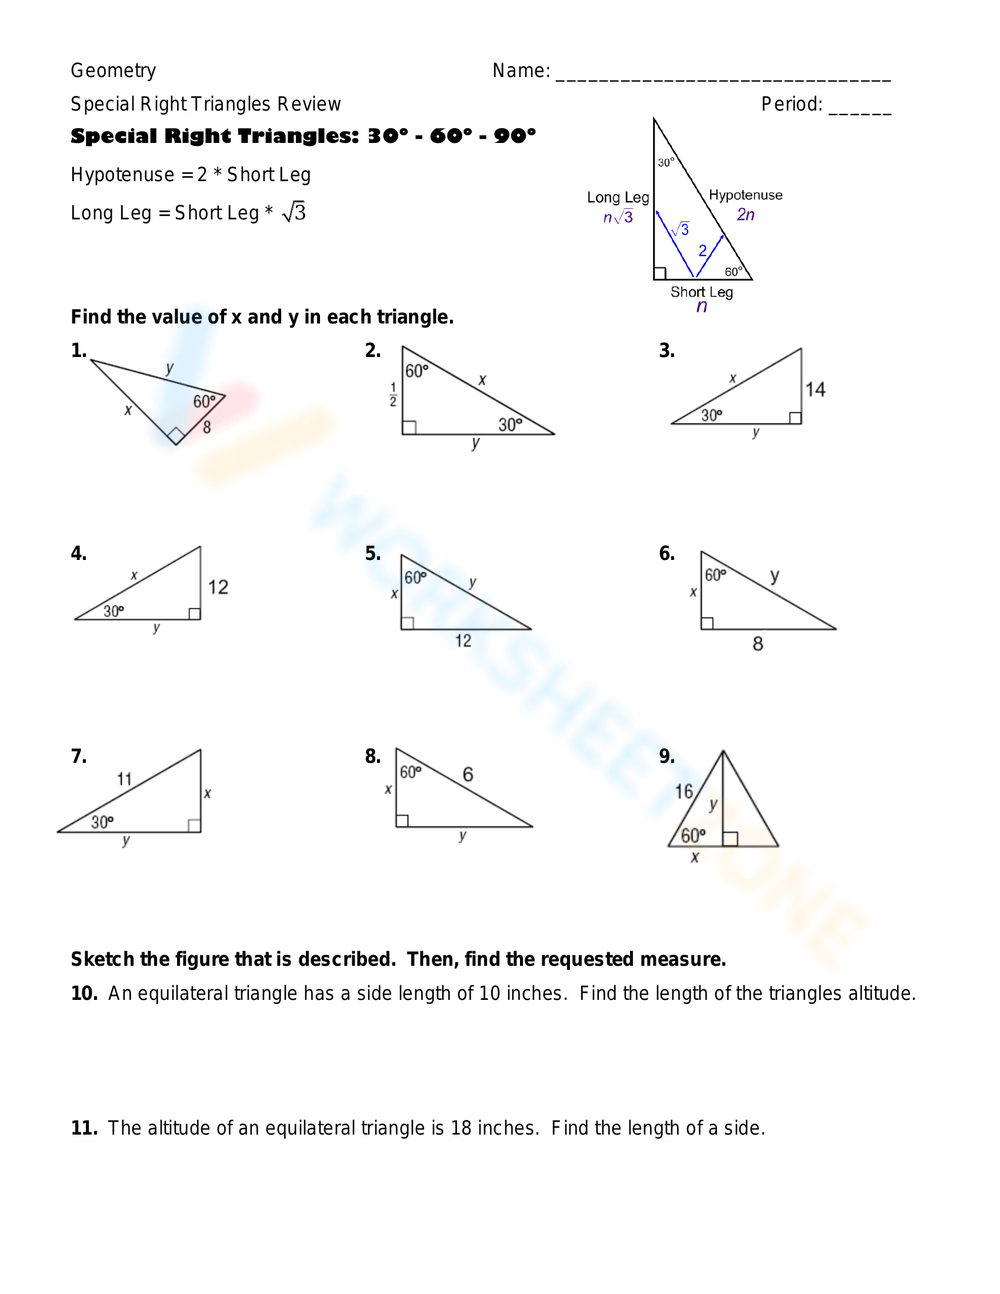 Special Right Triangles Review Worksheet 9938